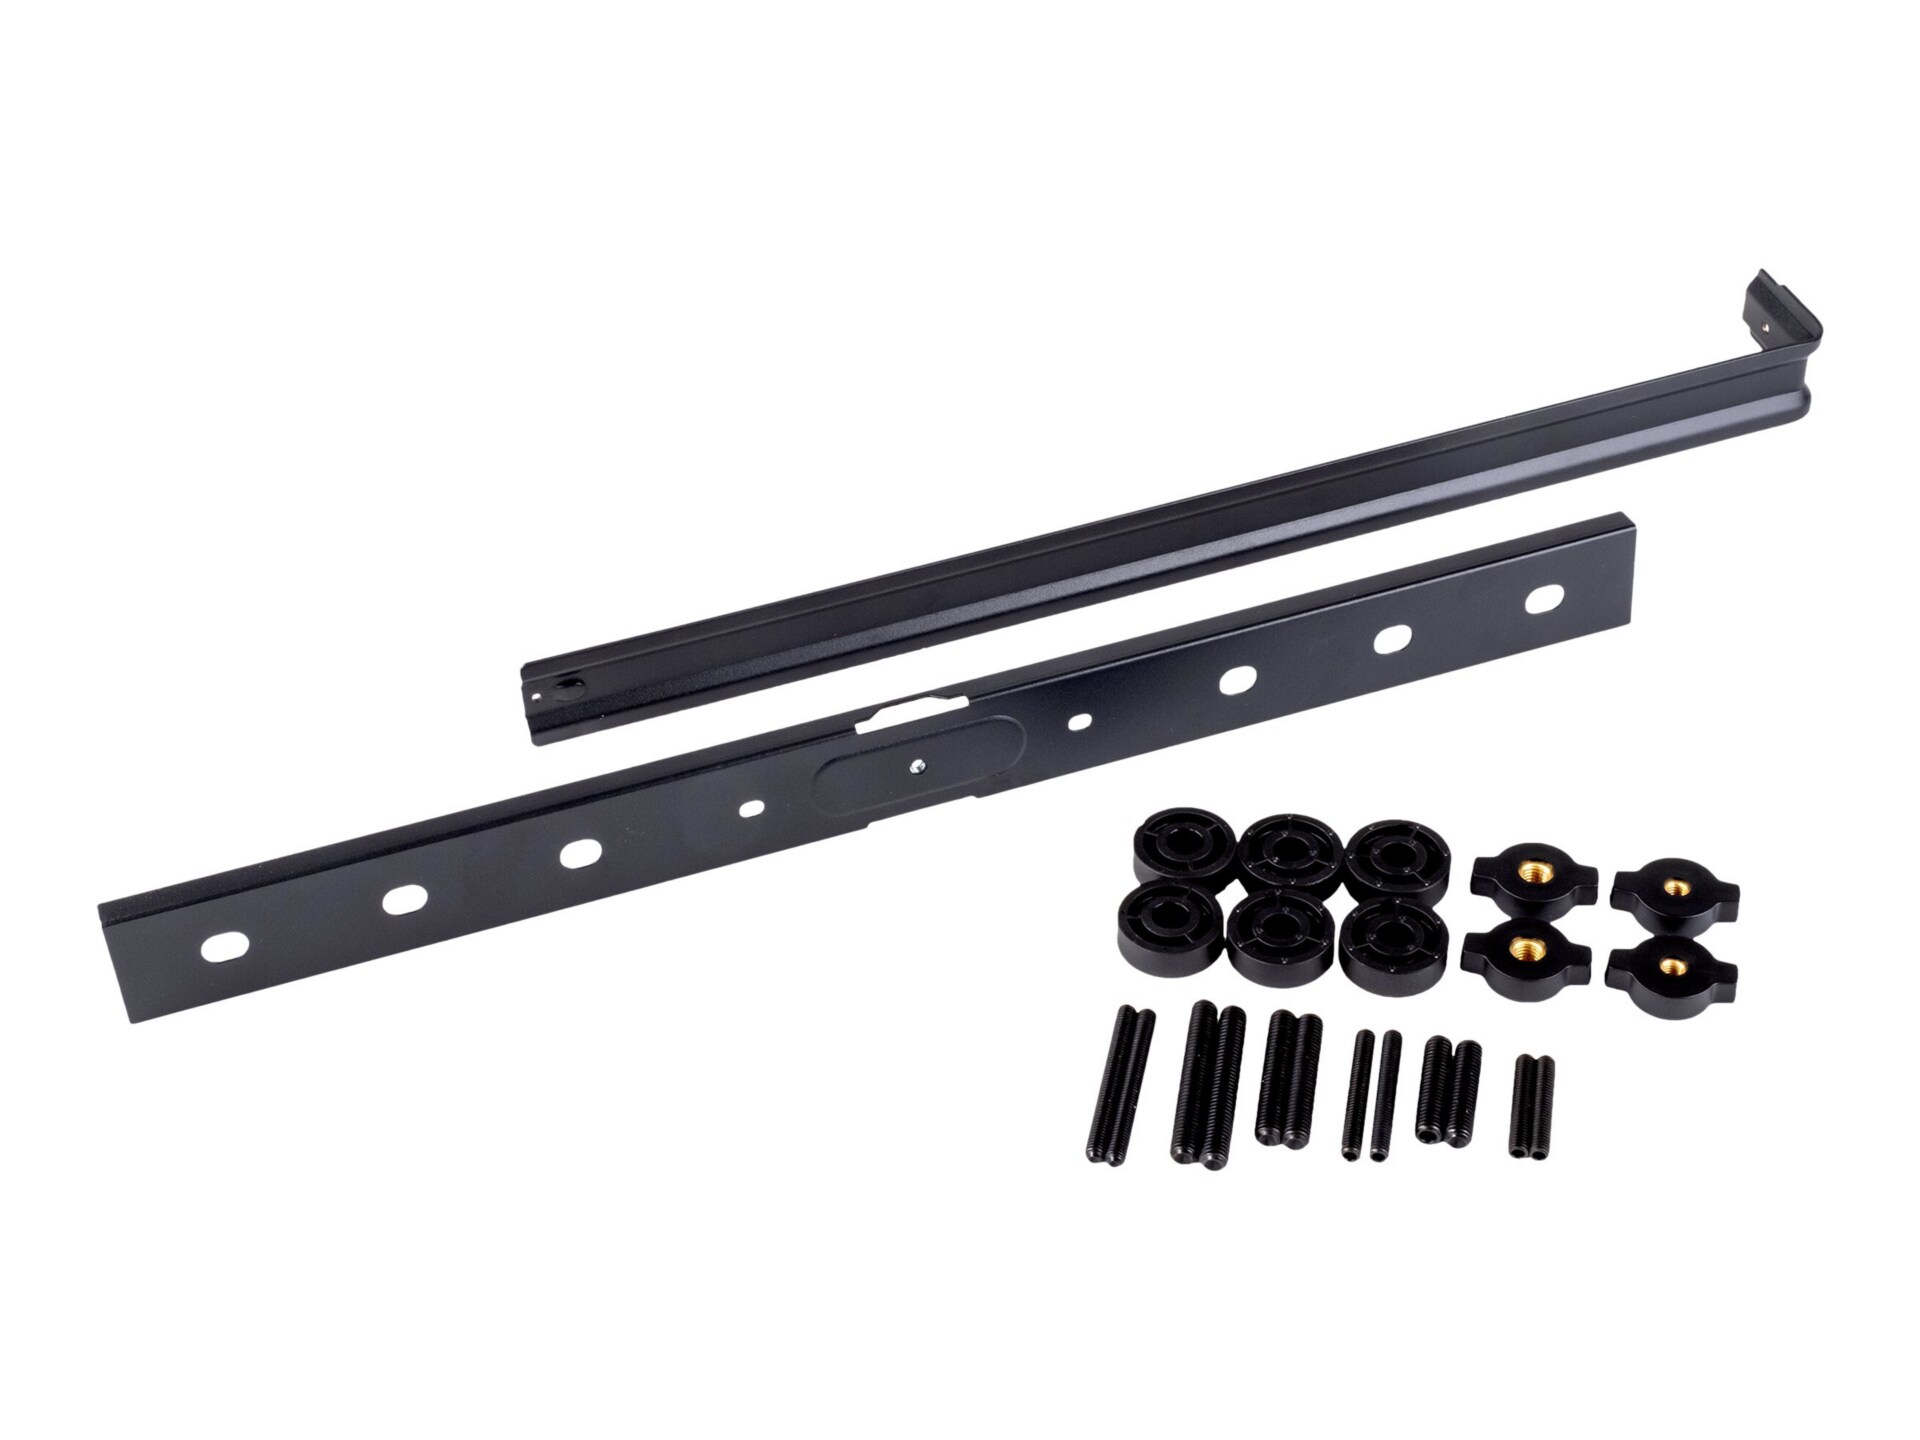 Cisco Screen Mount - video conferencing mounting kit